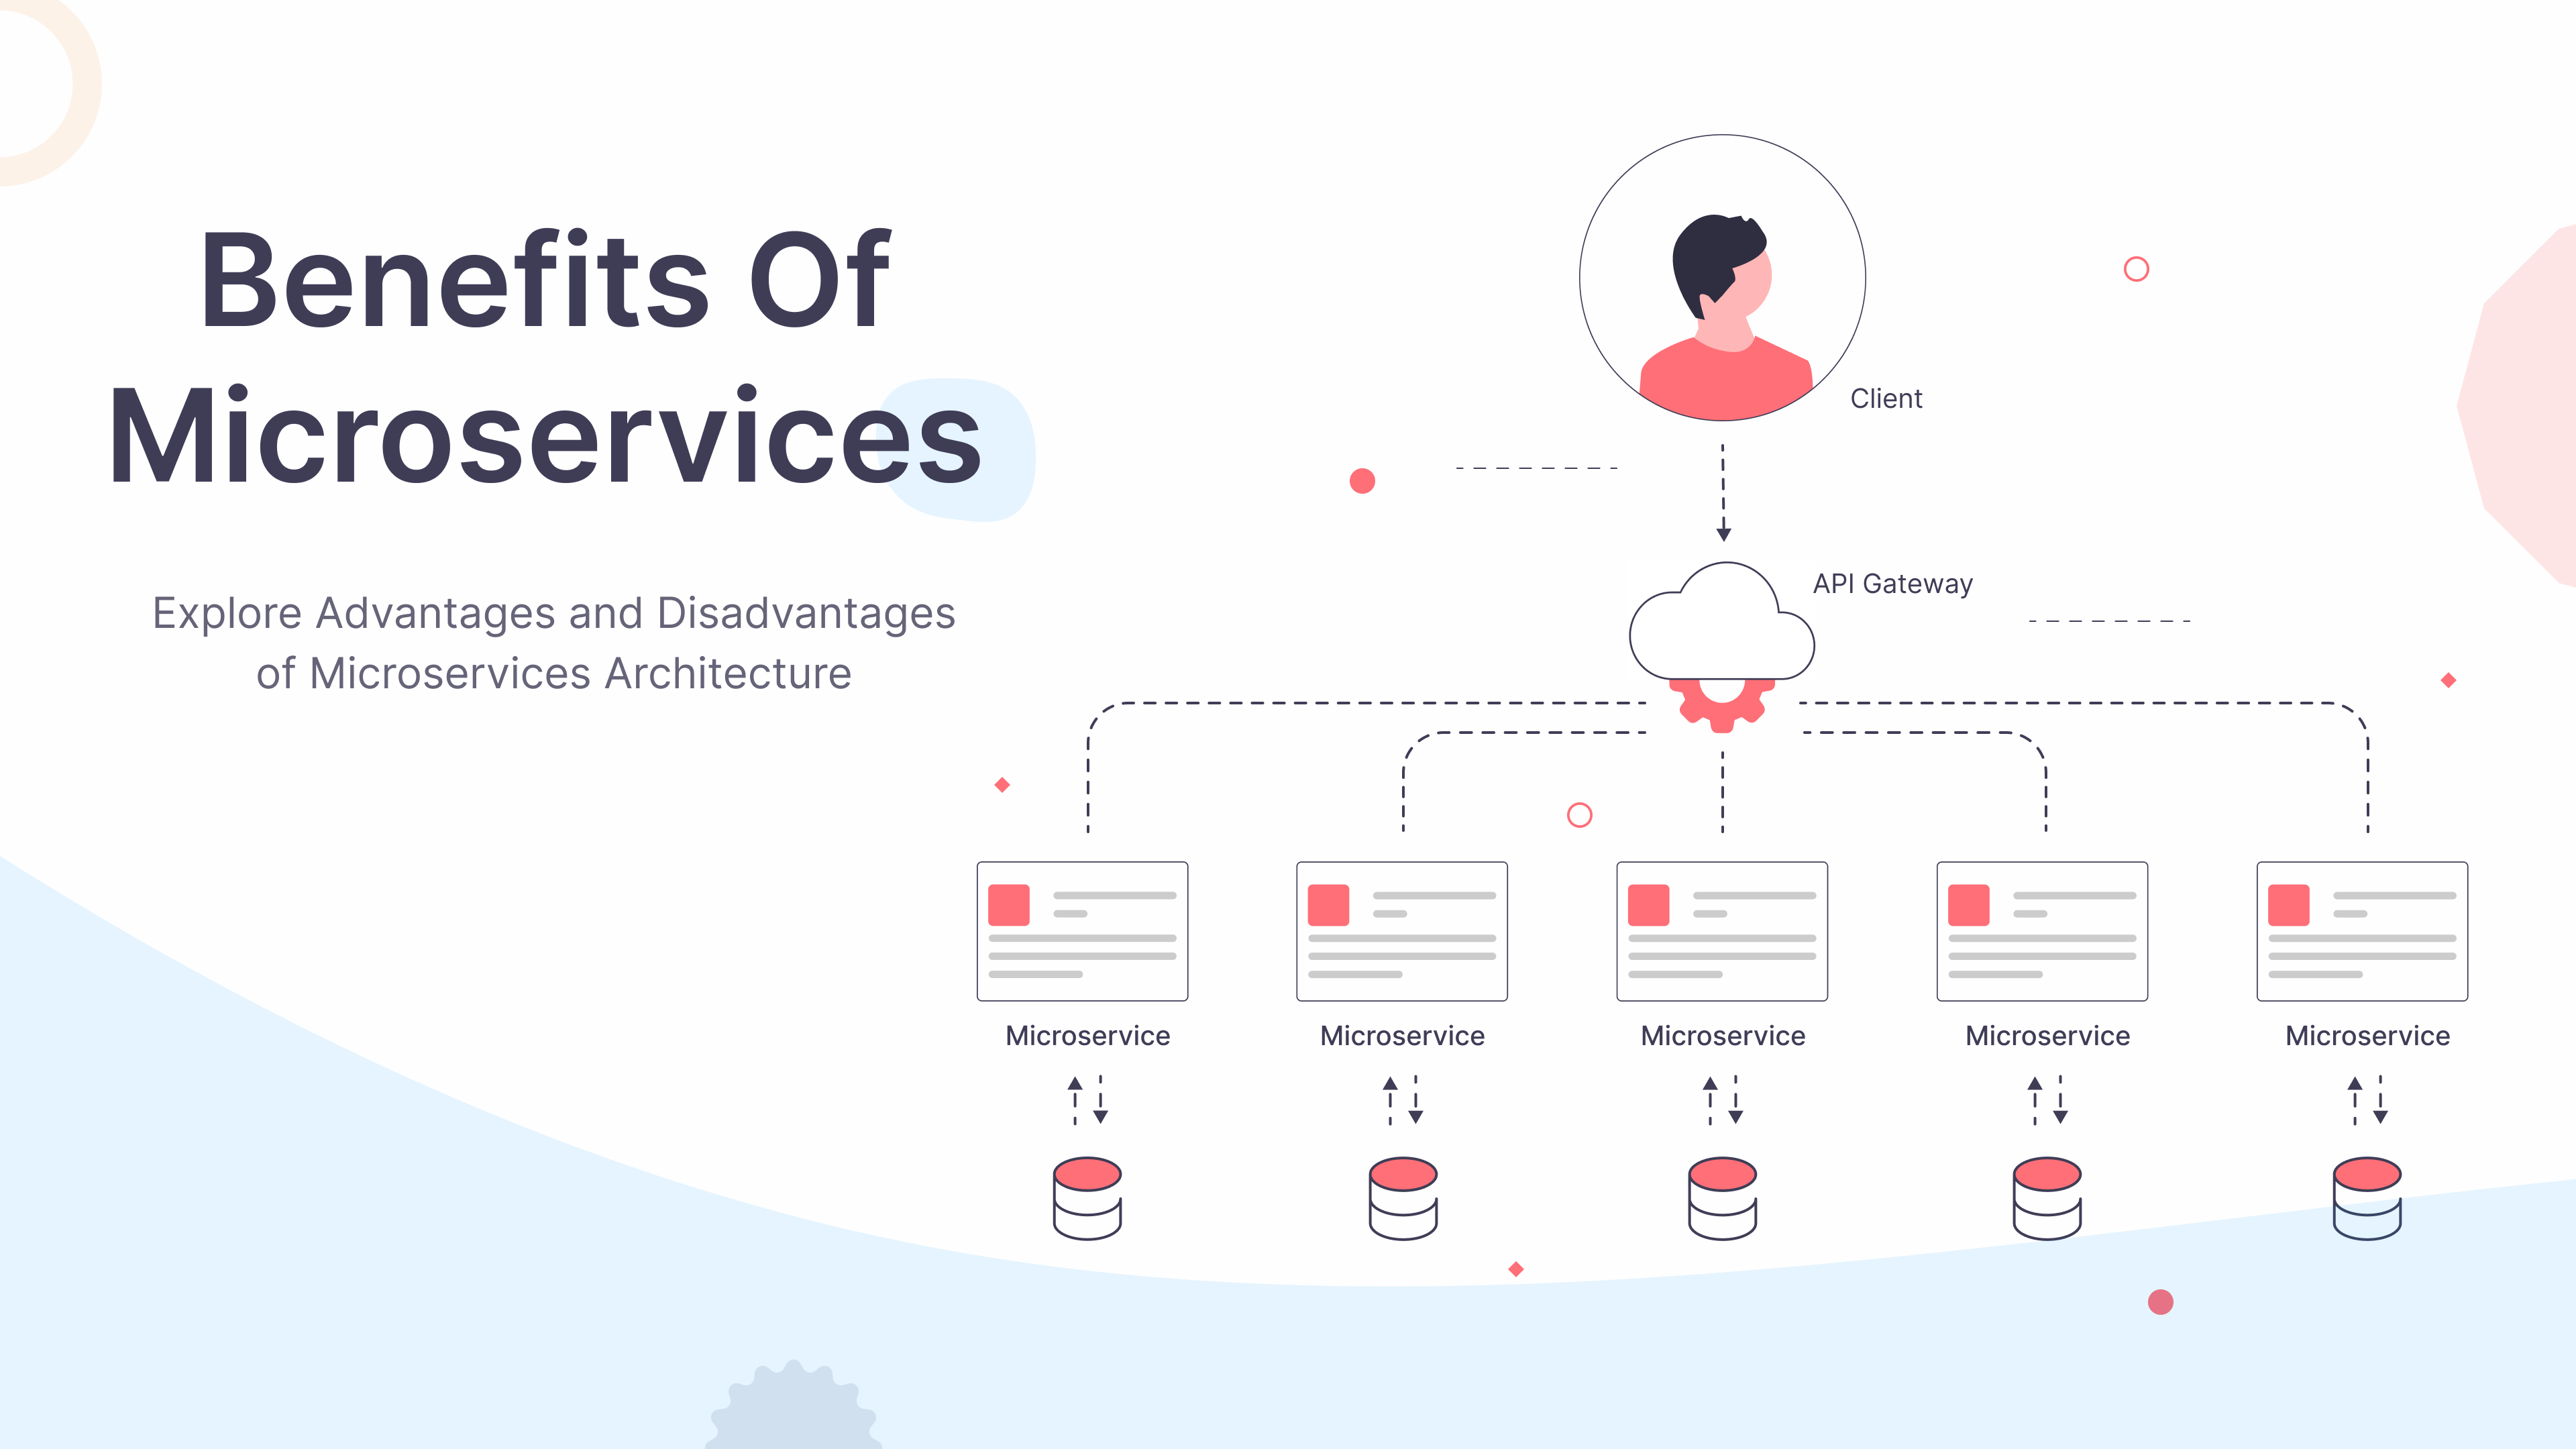 Benefits of Microservices - A Strategic Choice for the Future